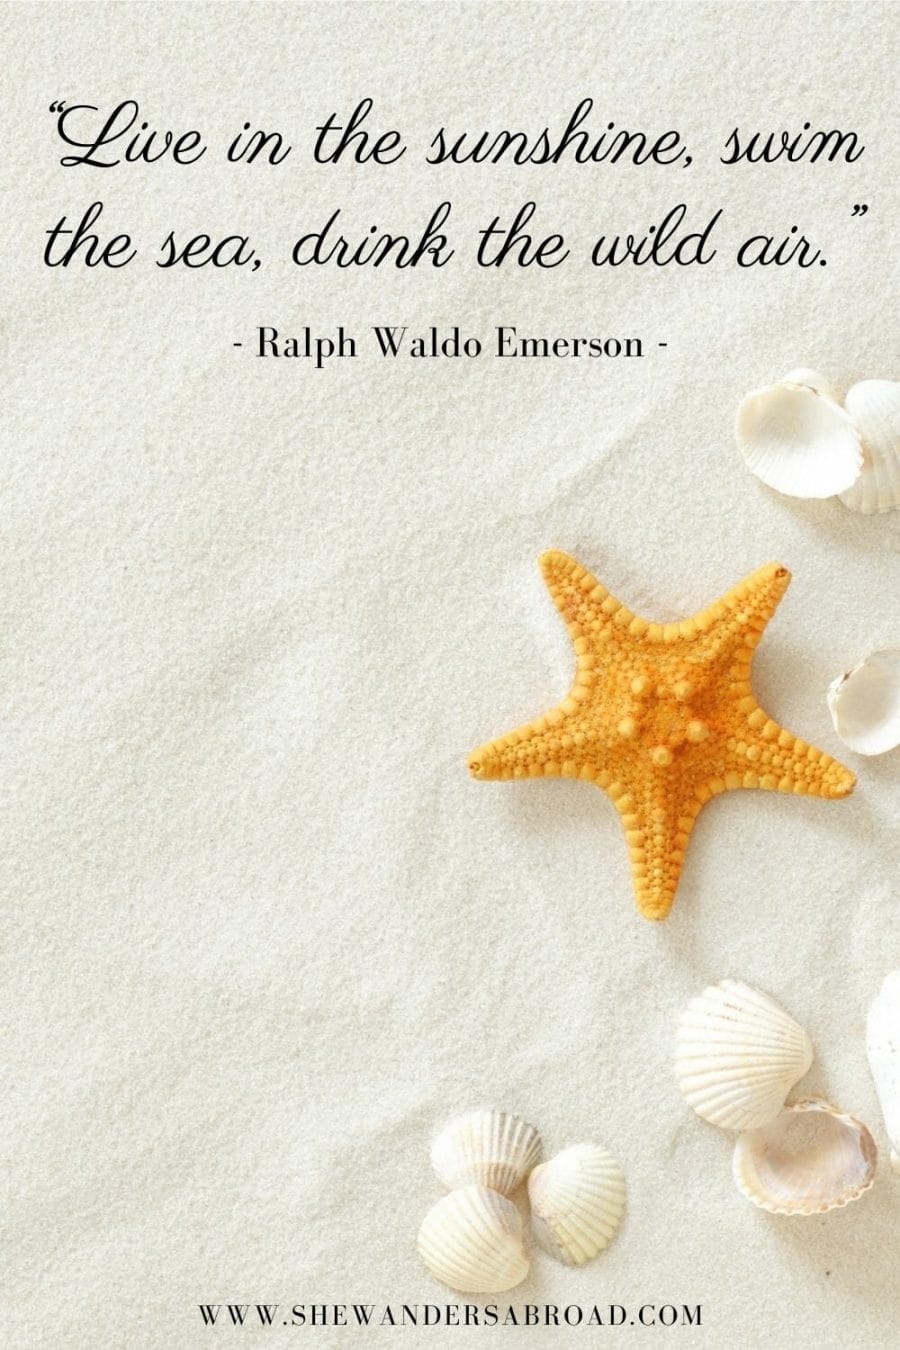 Short beach quotes and sayings